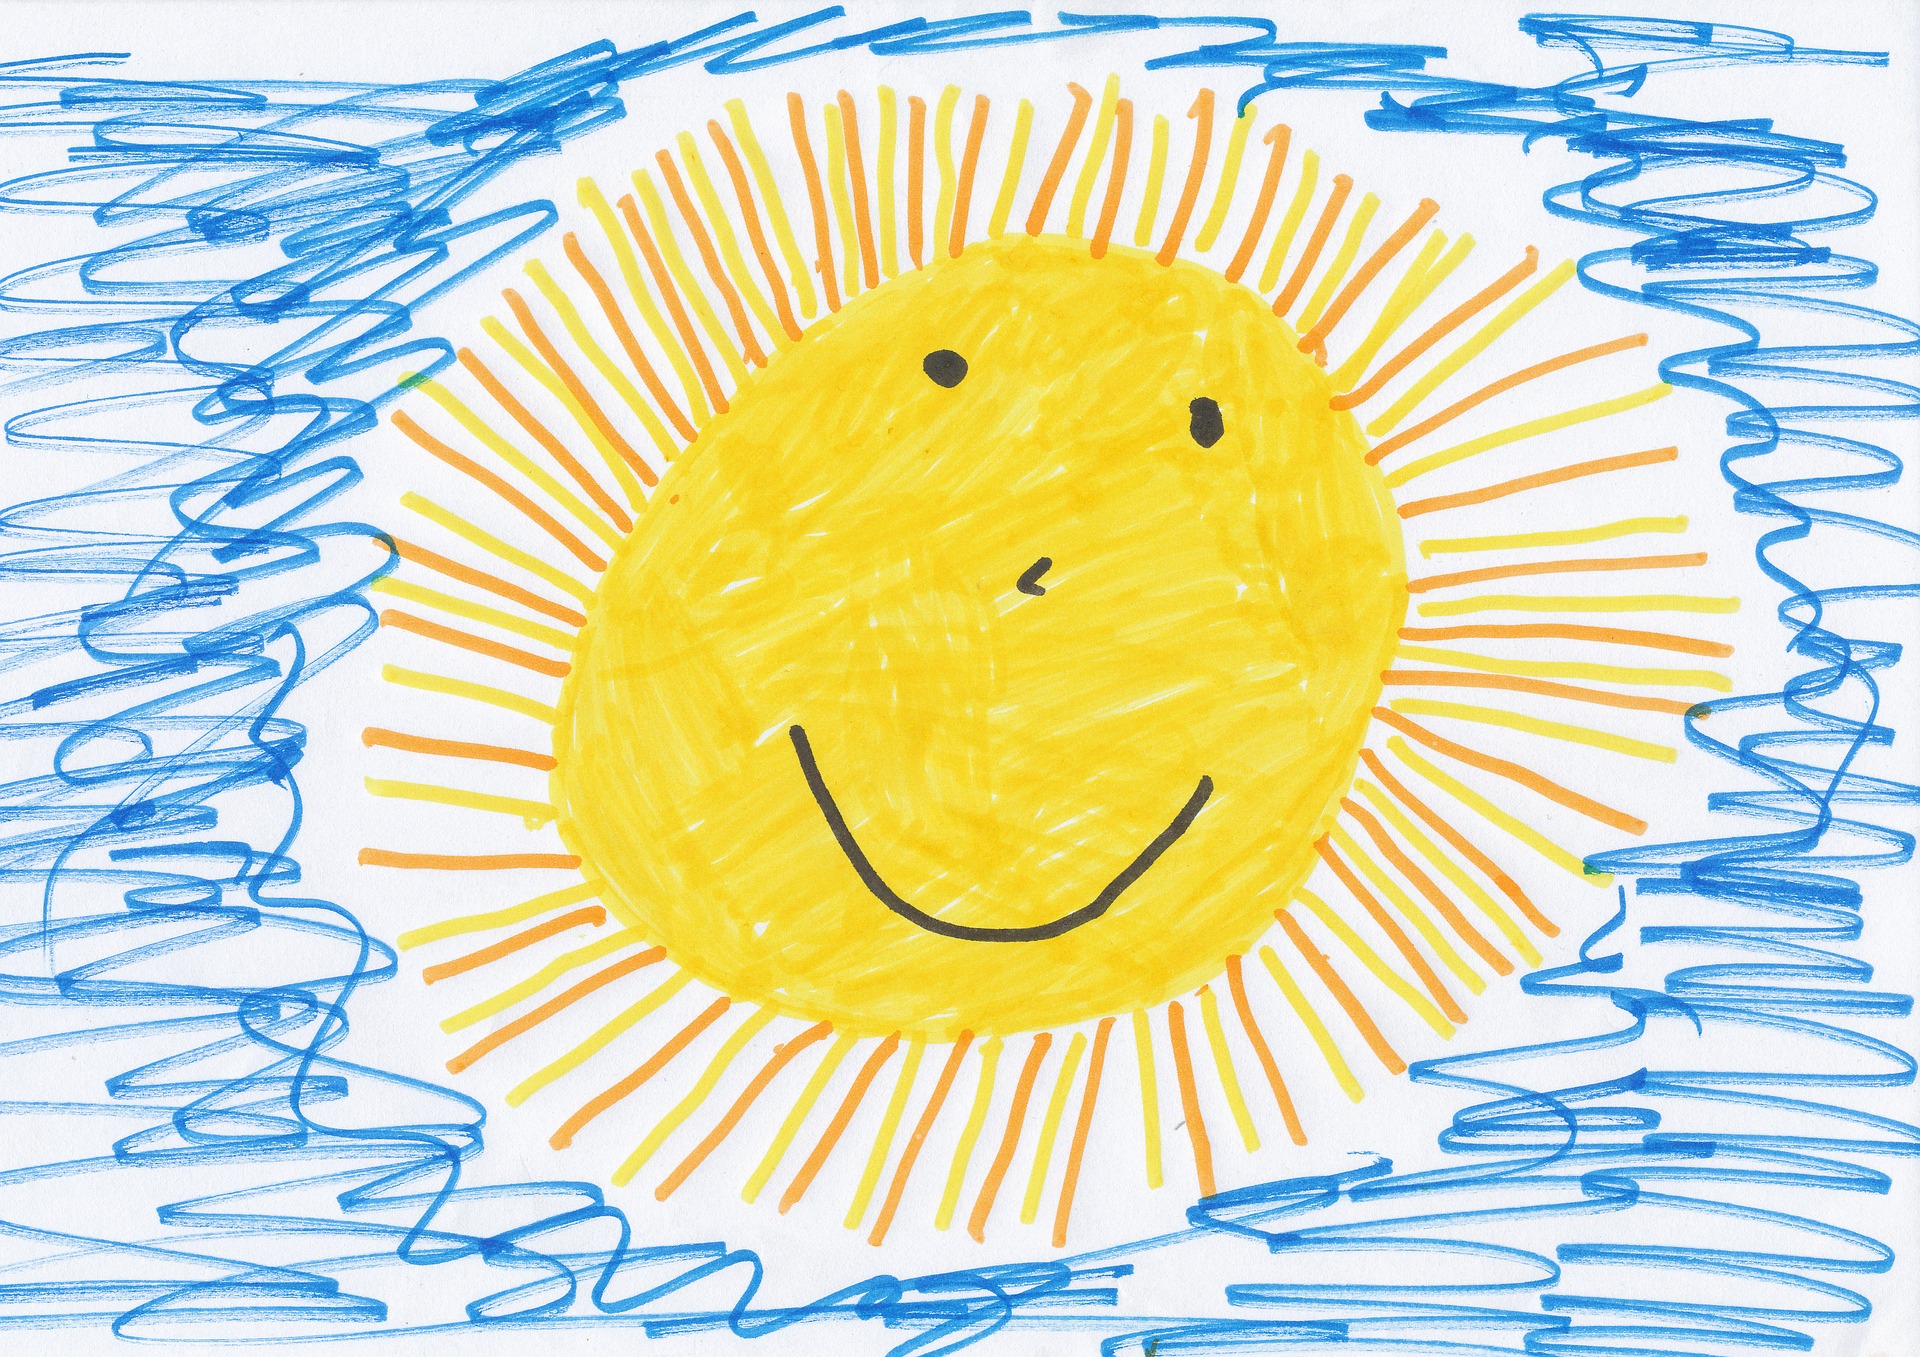 Drawing of a cartoon sun with a smiling face.